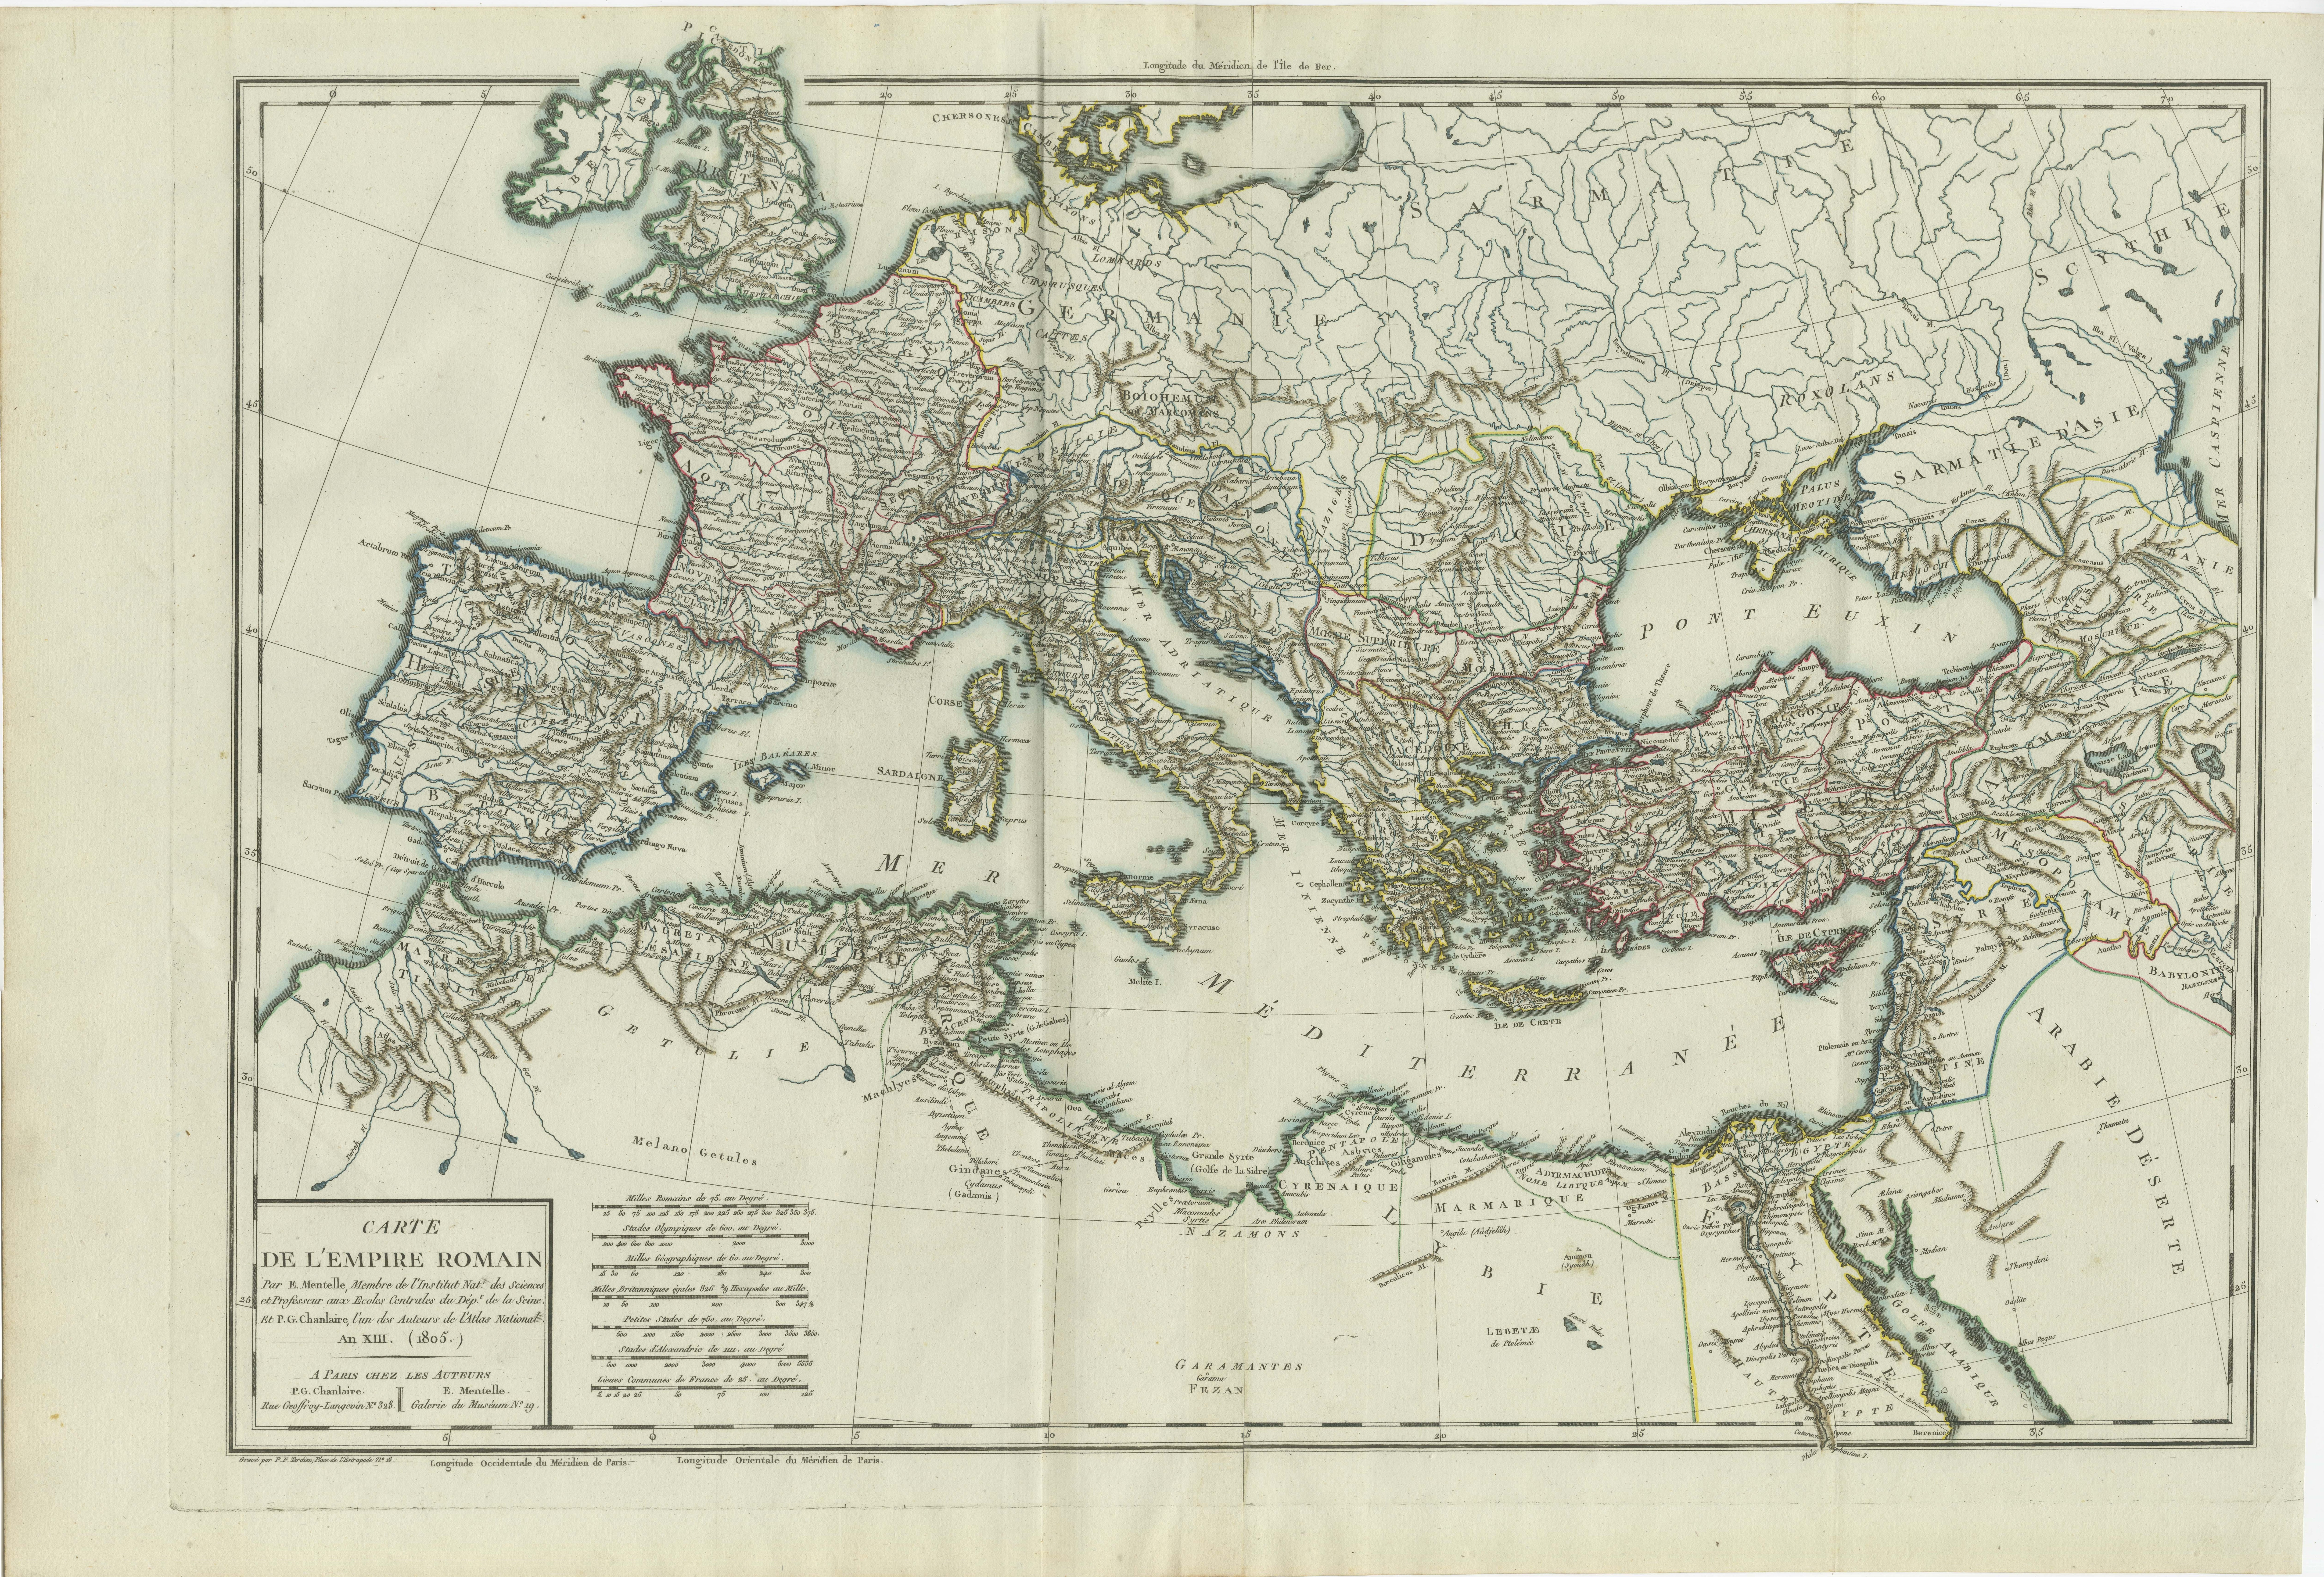 Antique map titled 'Carte de l'Empire Romain'. Original antique map of the Roman Empire, two sheets joined. Engraved by Pierre Francois Tardieu and published by Edme Mentelle, circa 1788 